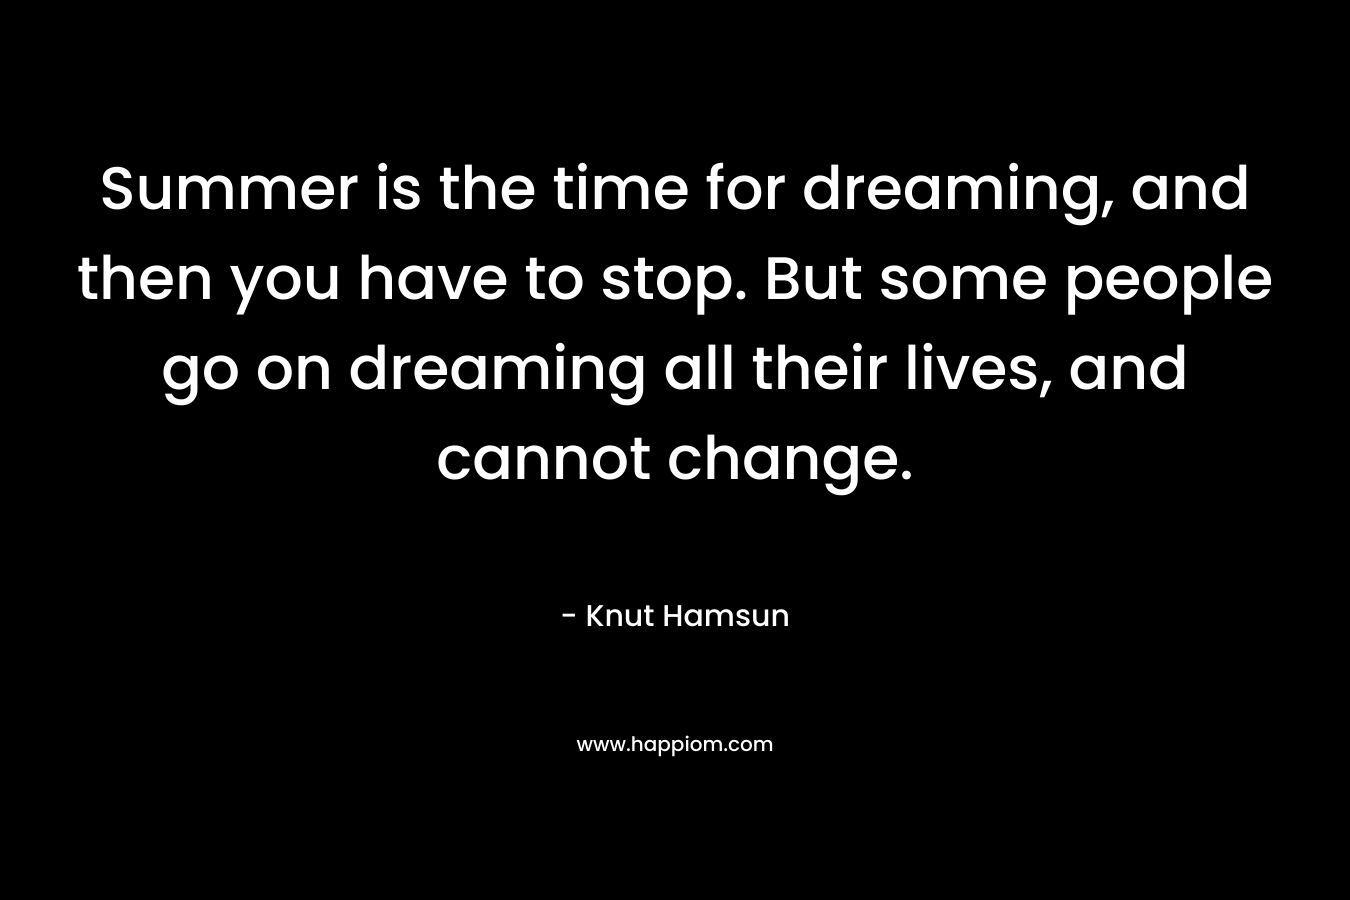 Summer is the time for dreaming, and then you have to stop. But some people go on dreaming all their lives, and cannot change. – Knut Hamsun